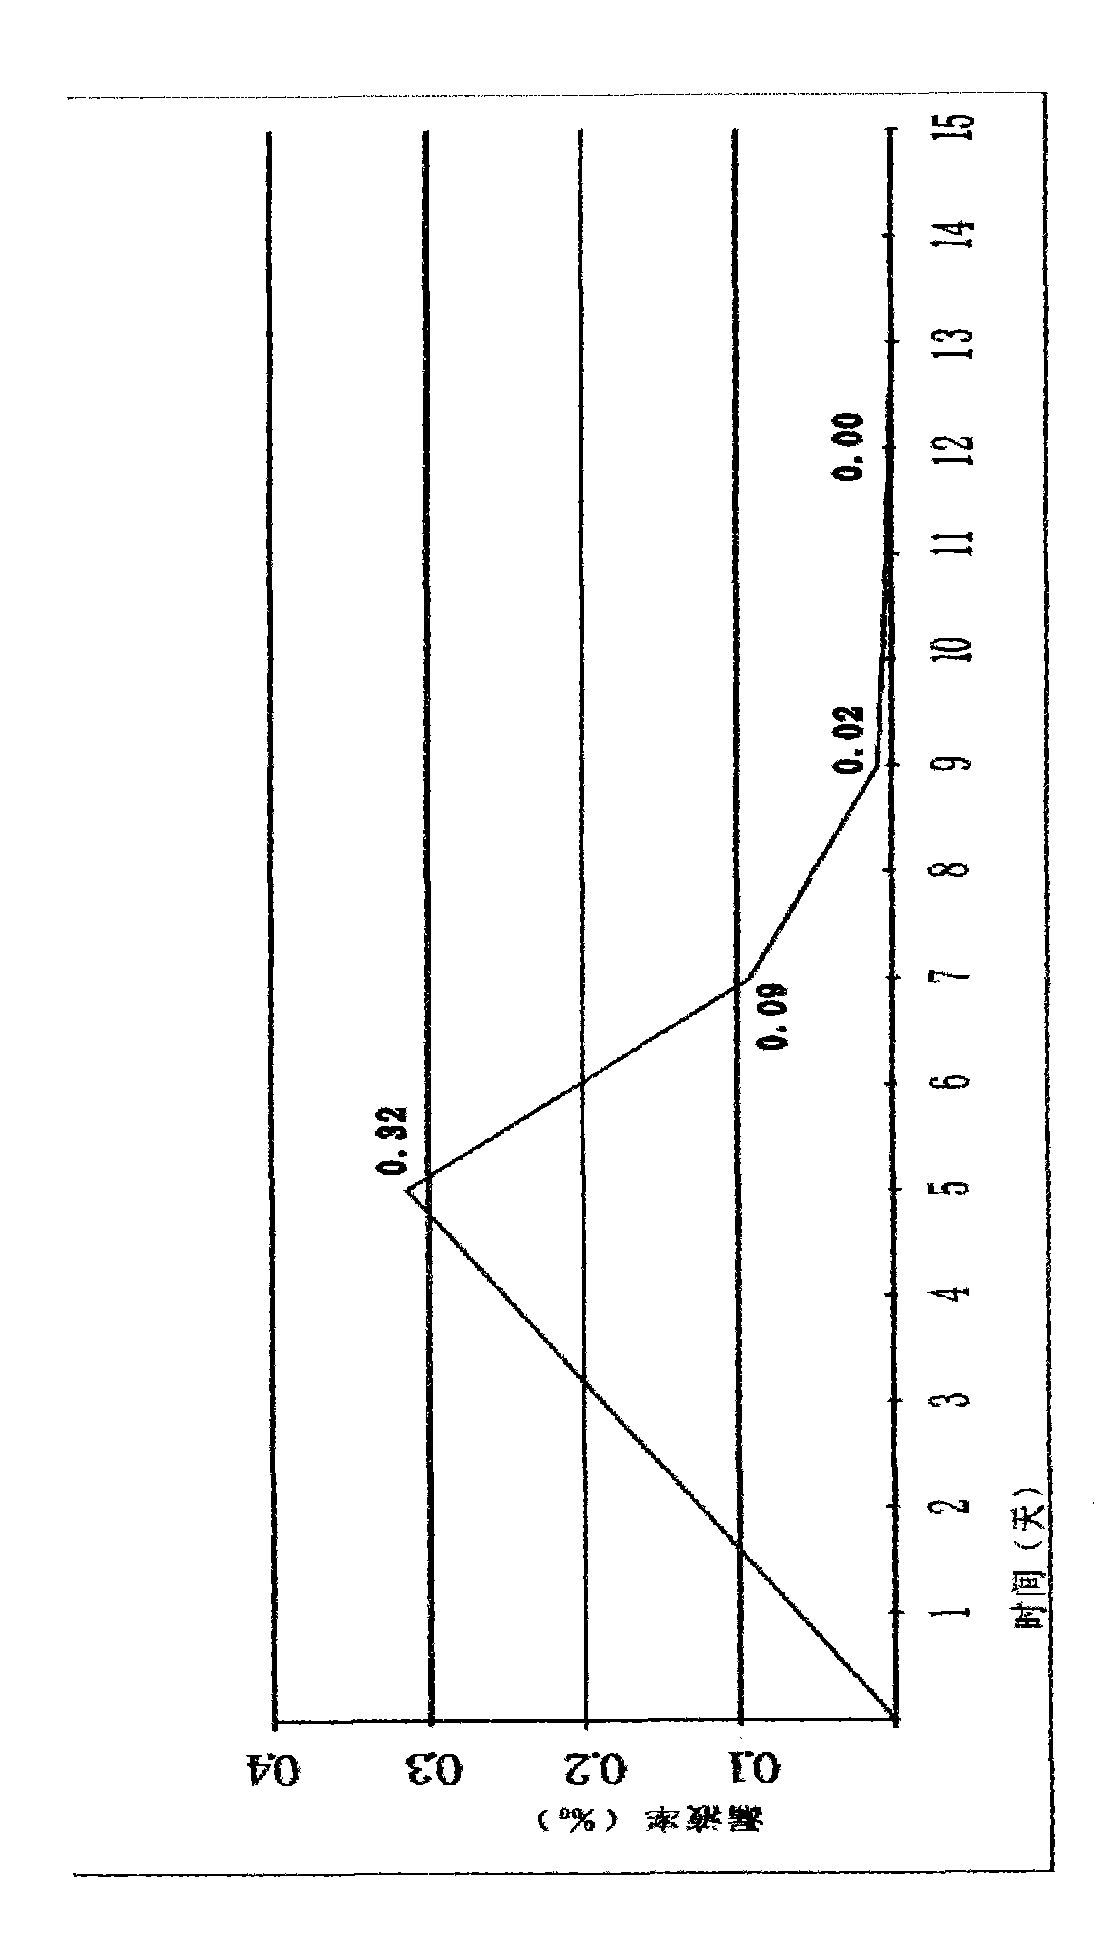 Application of double-layer vacuum time-delay leak detection technique in large capacity injection